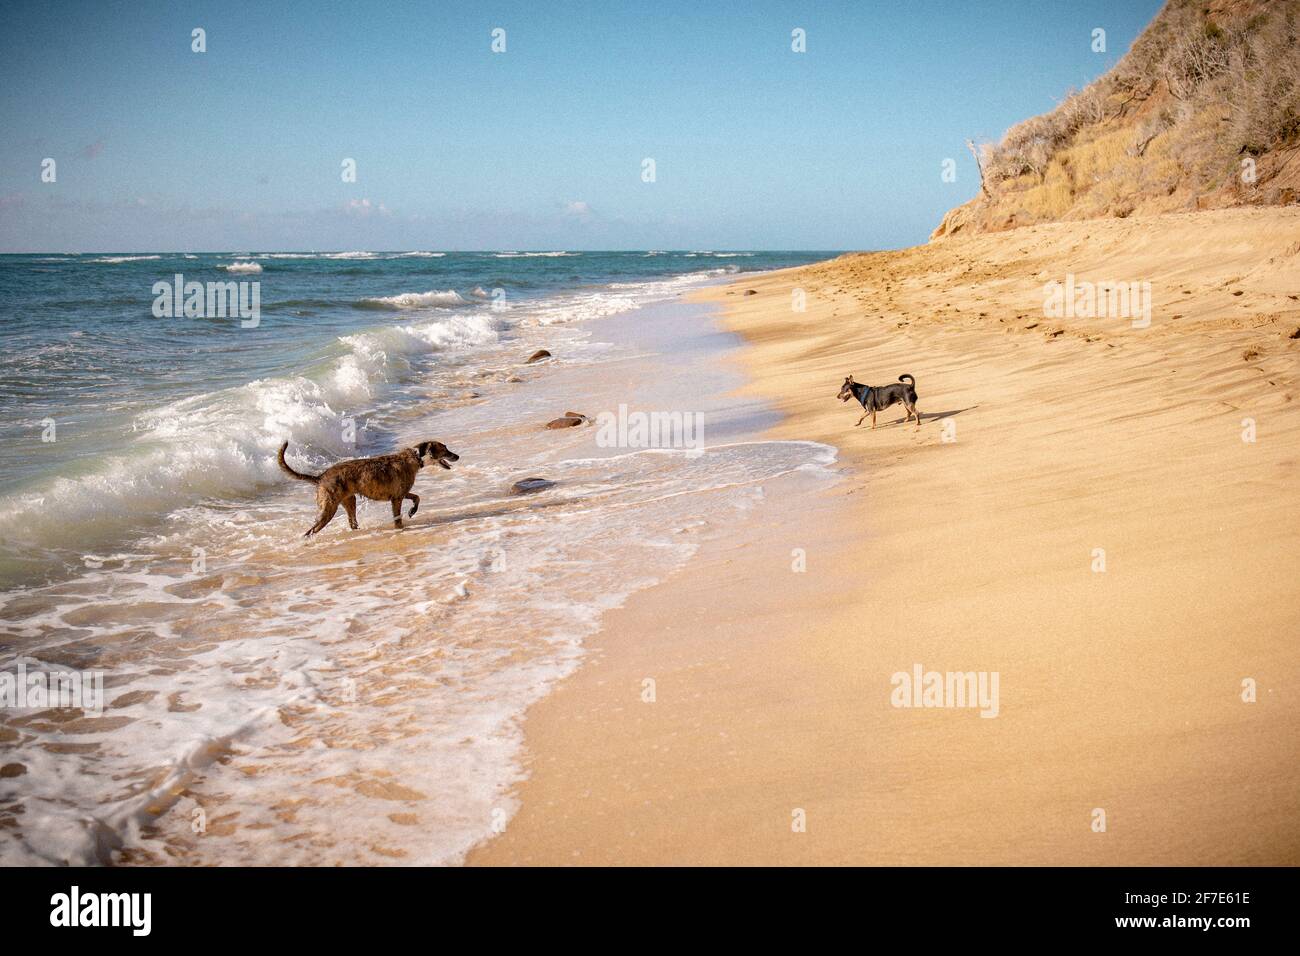 A sunny beach day in Hawaii with two dogs. playing in the waves Stock Photo